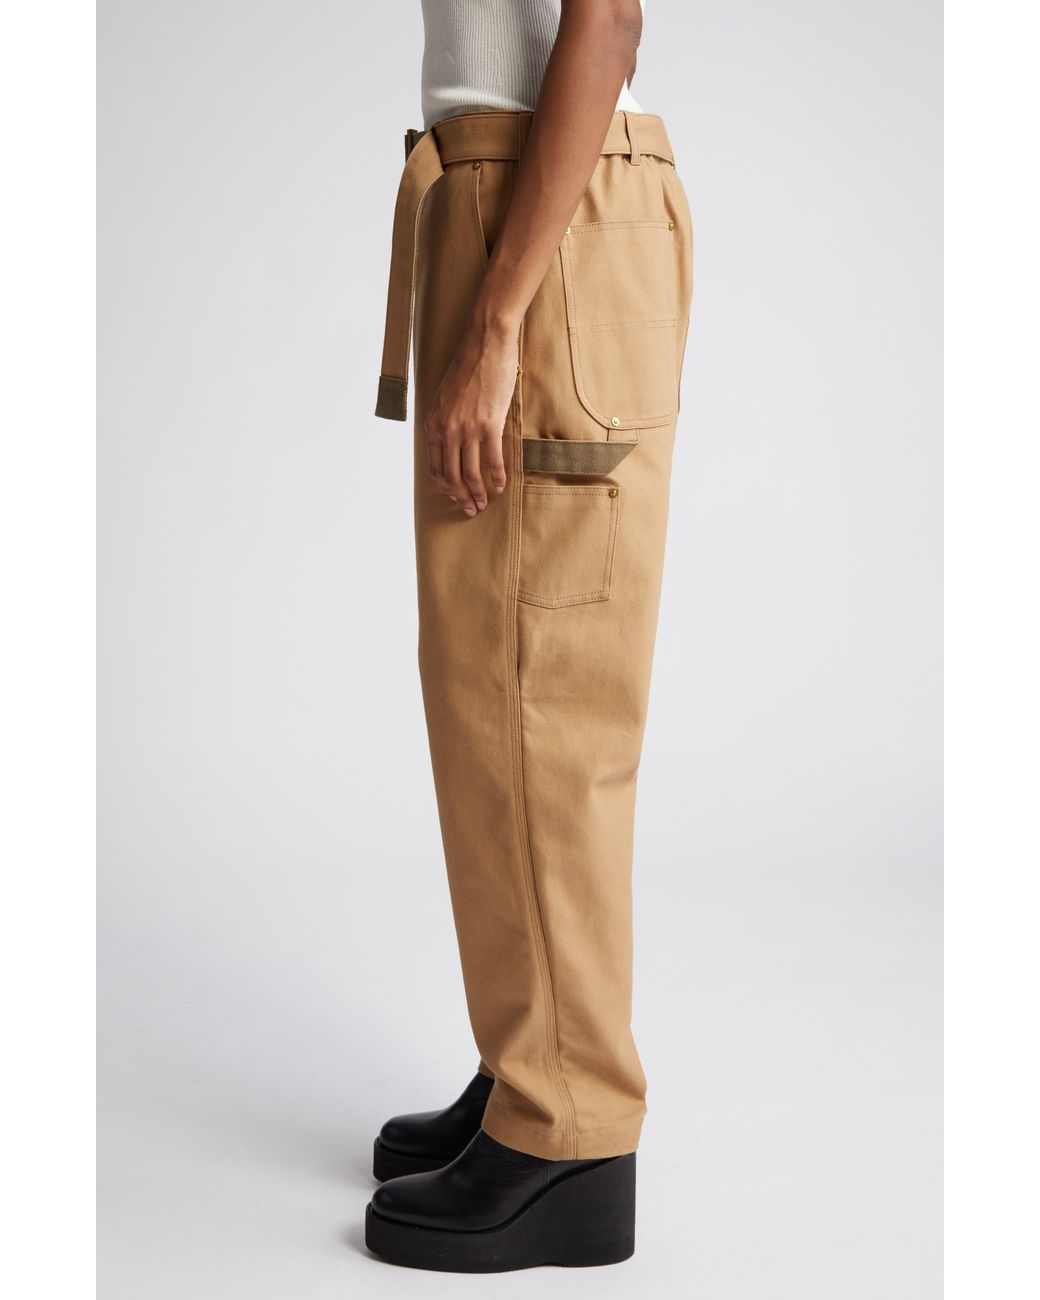 Sacai X Carhartt Wip Belted Cotton Canvas Pants in Natural for Men